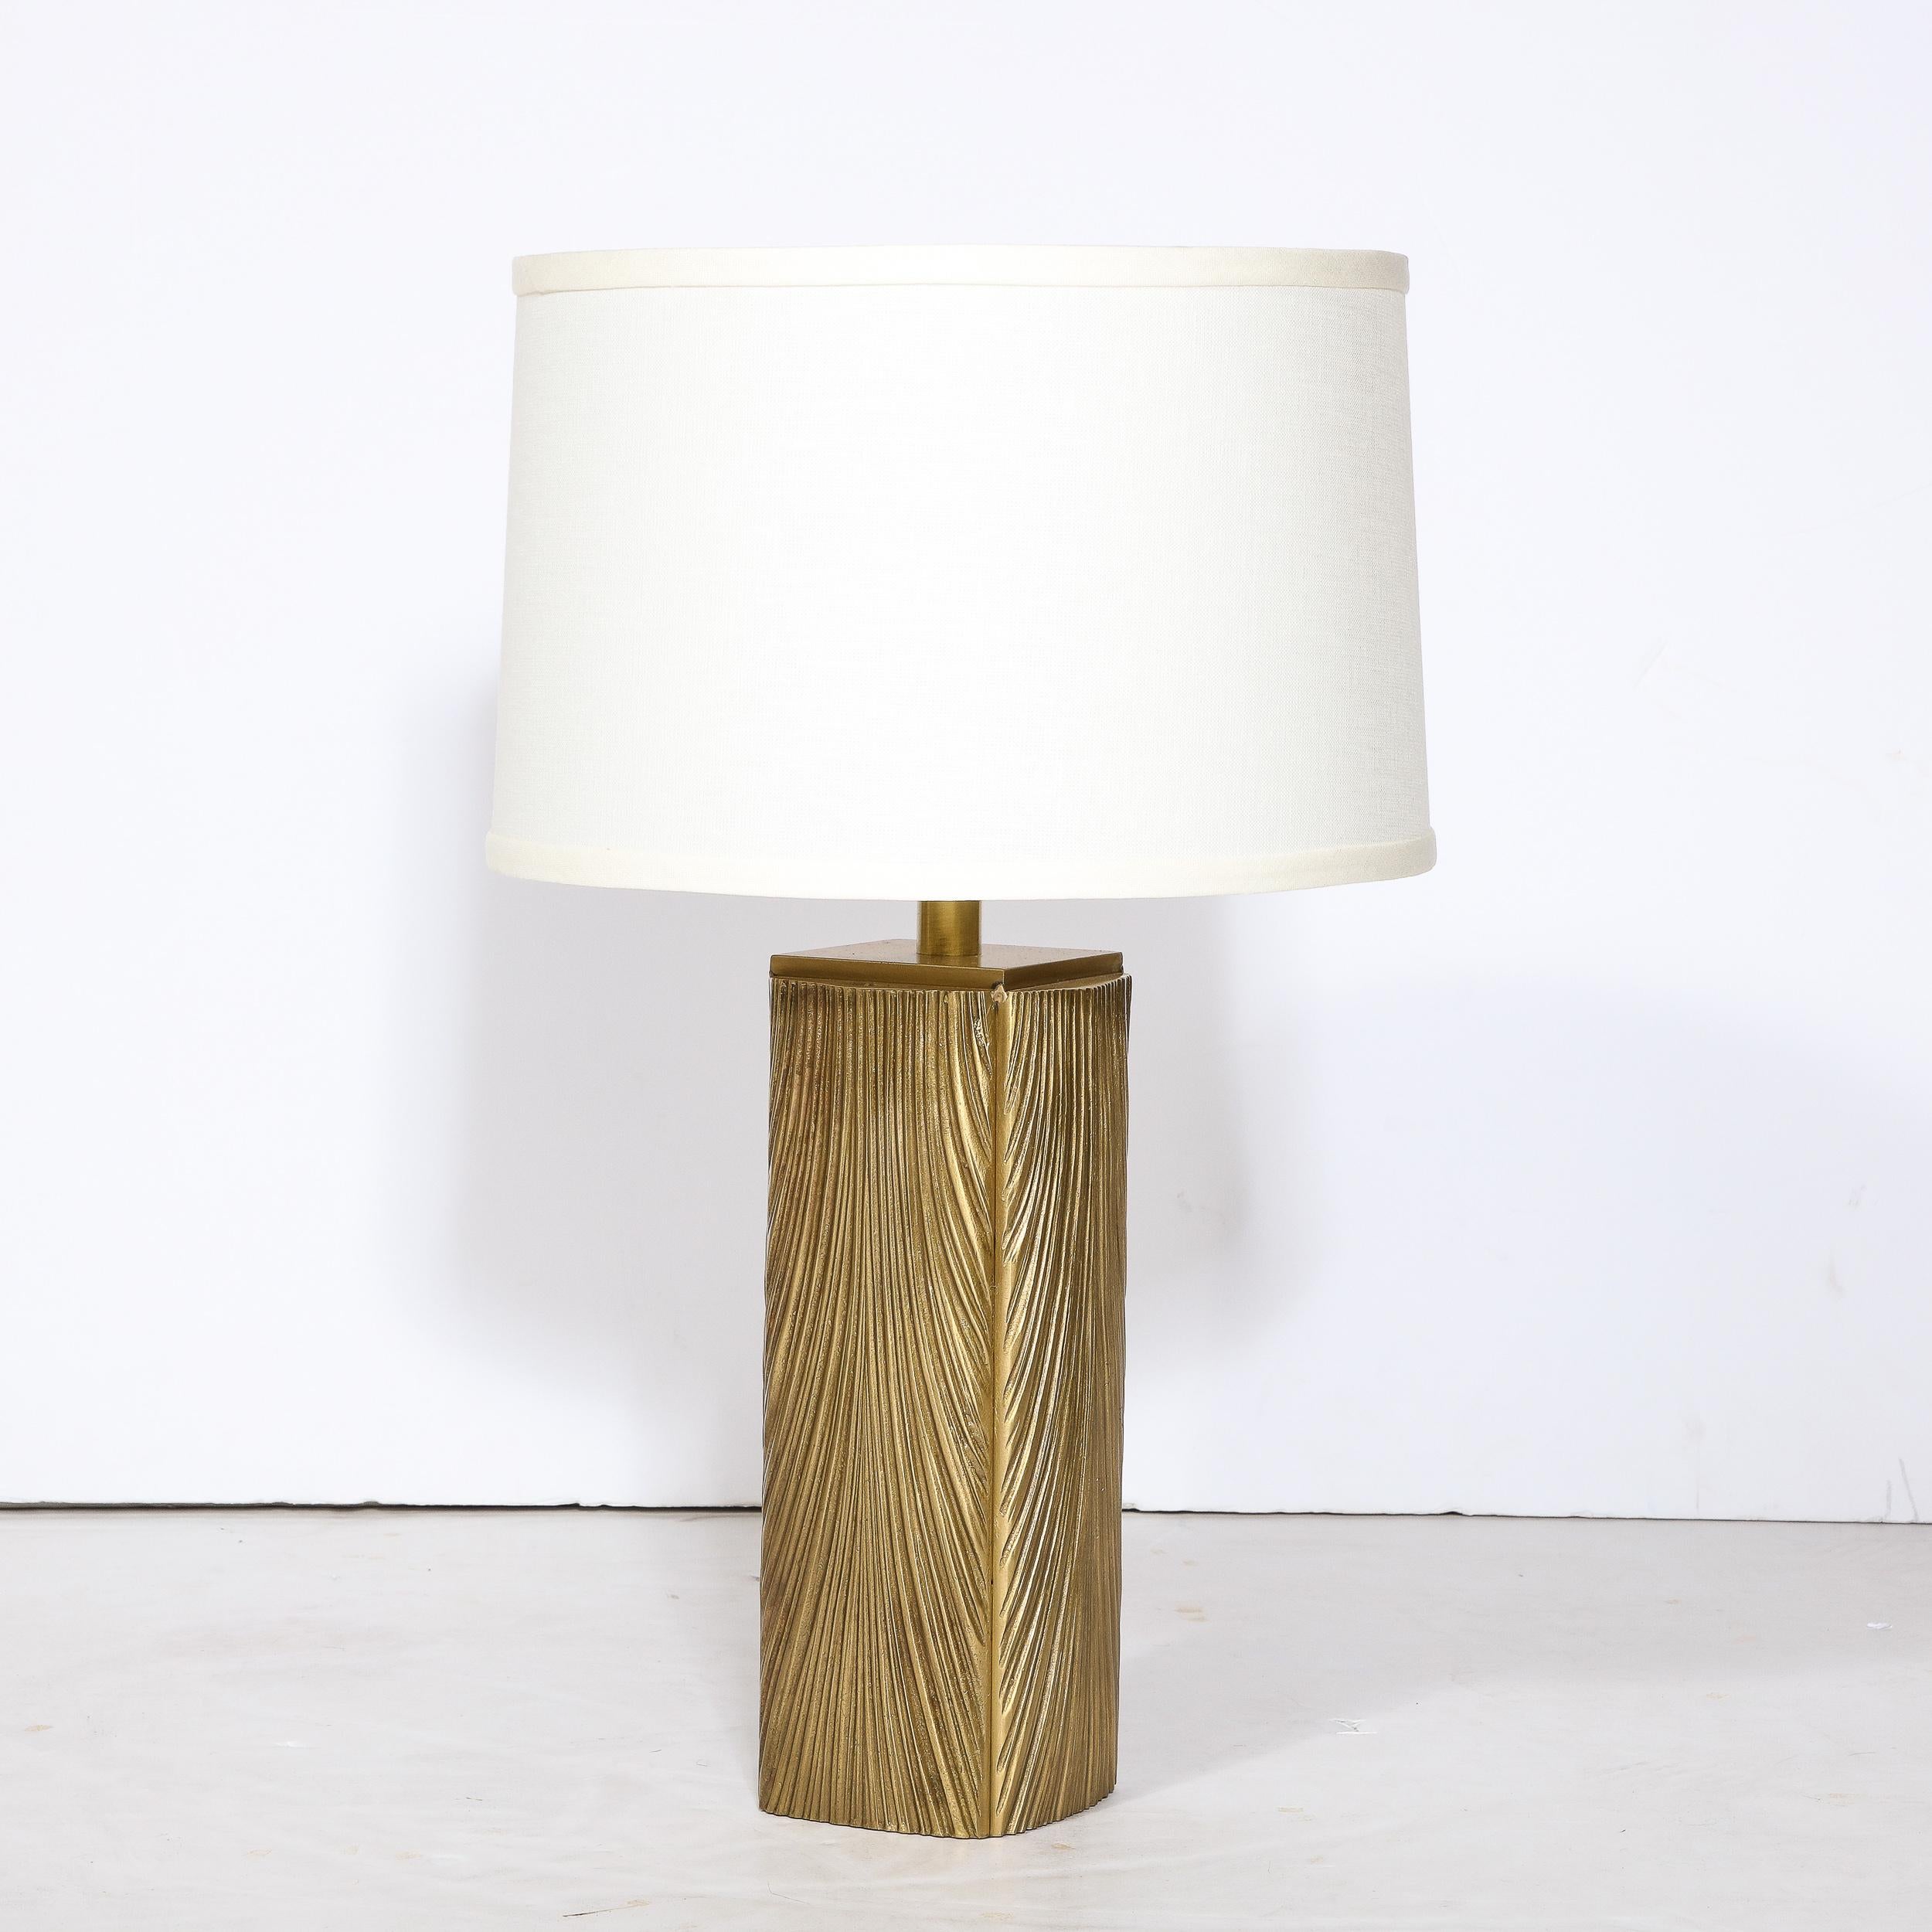 Italian Pair of Midcentury Feathered Brushed Brass Table Lamps by Luciano Frigerio